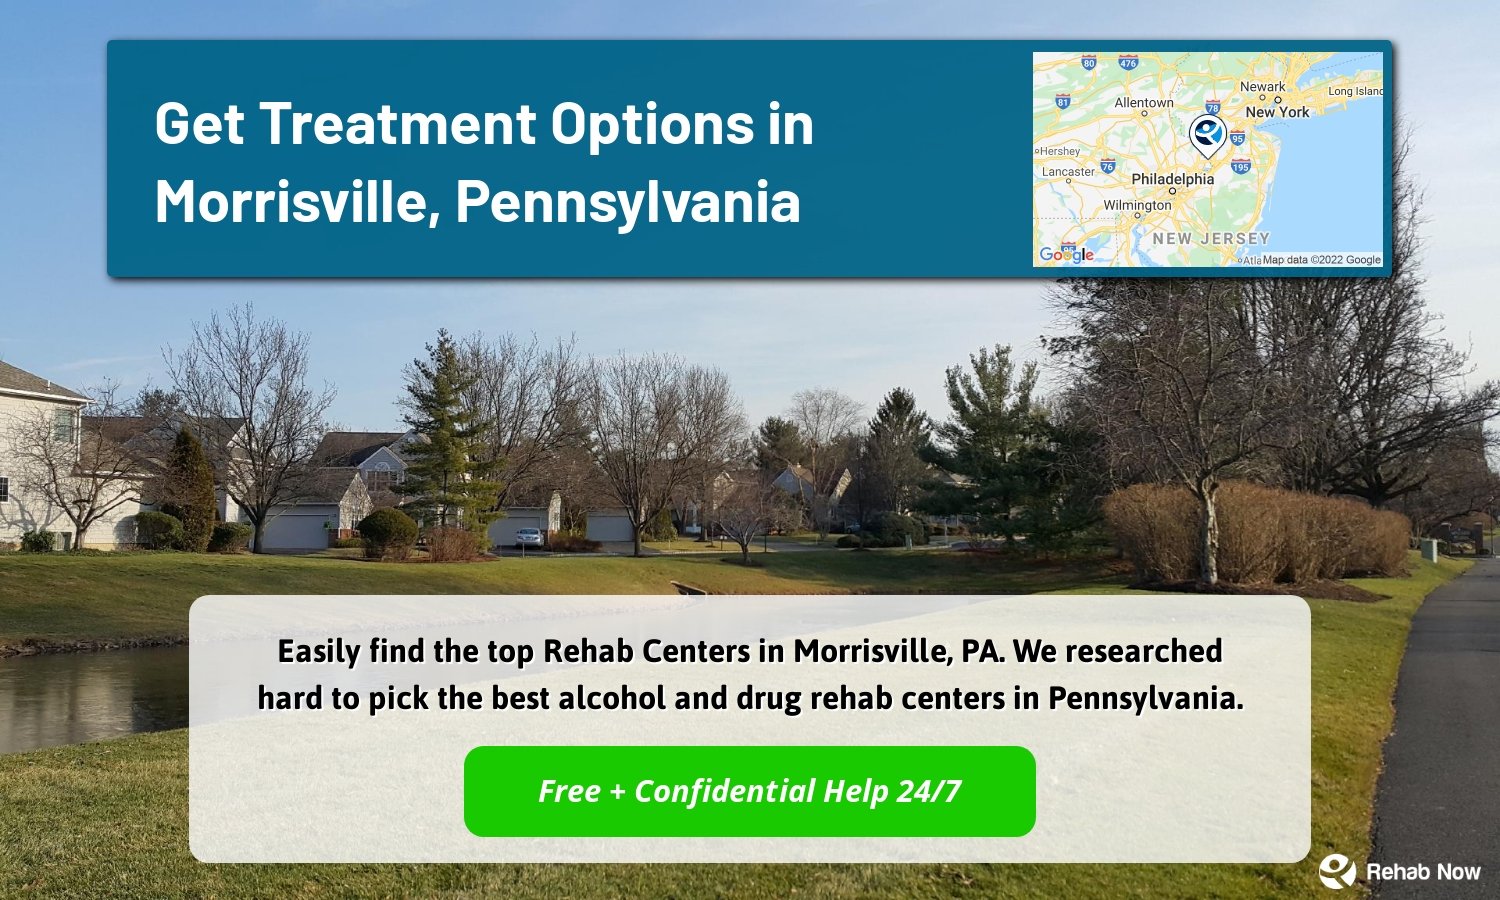 Easily find the top Rehab Centers in Morrisville, PA. We researched hard to pick the best alcohol and drug rehab centers in Pennsylvania.